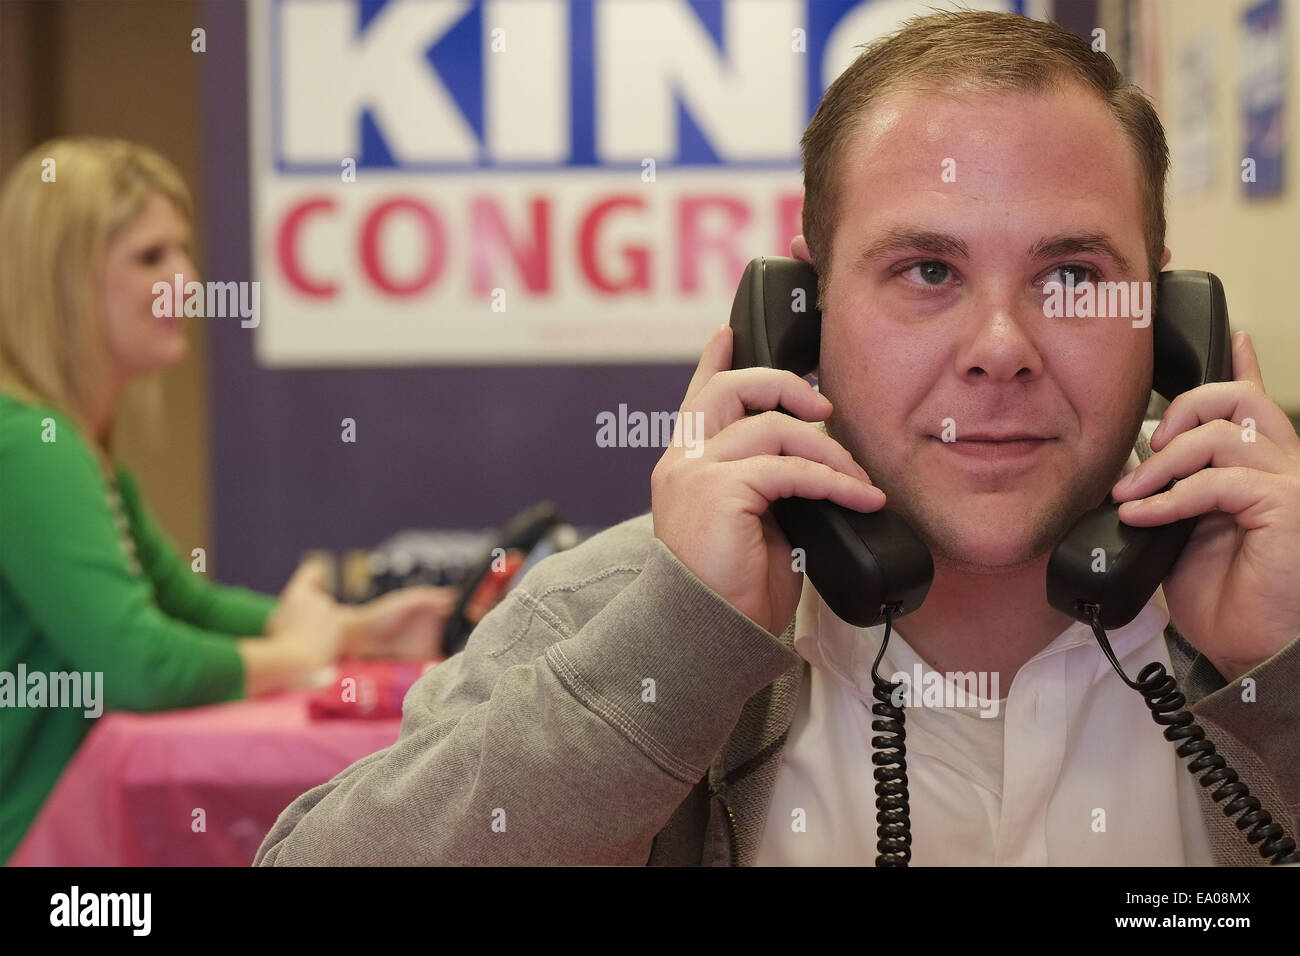 Sioux City, Iowa, USA. 4th Nov, 2014. ZACH MUDER, Sioux City, Iowa, Republican supporter, dials two phones at once, at the Sioux City Republican Victory office, and then hangs up one when someone answers as he makes phone calls to get the vote out on Election Day. Credit:  Jerry Mennenga/ZUMA Wire/Alamy Live News Stock Photo